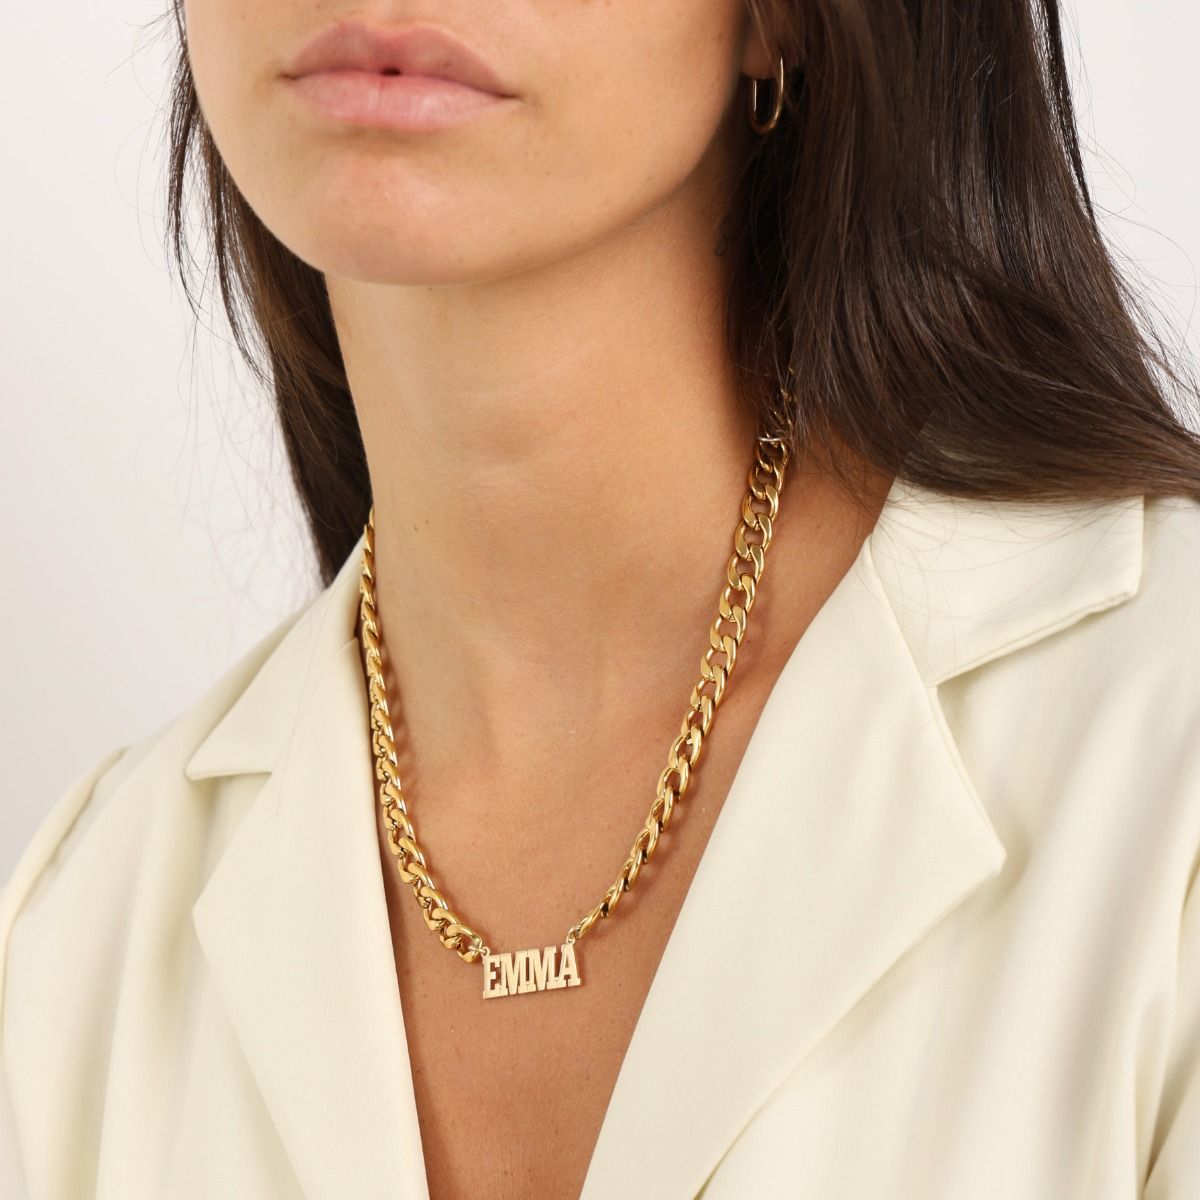 Emma Curb Chain Necklace in Silver for Women - Talisa